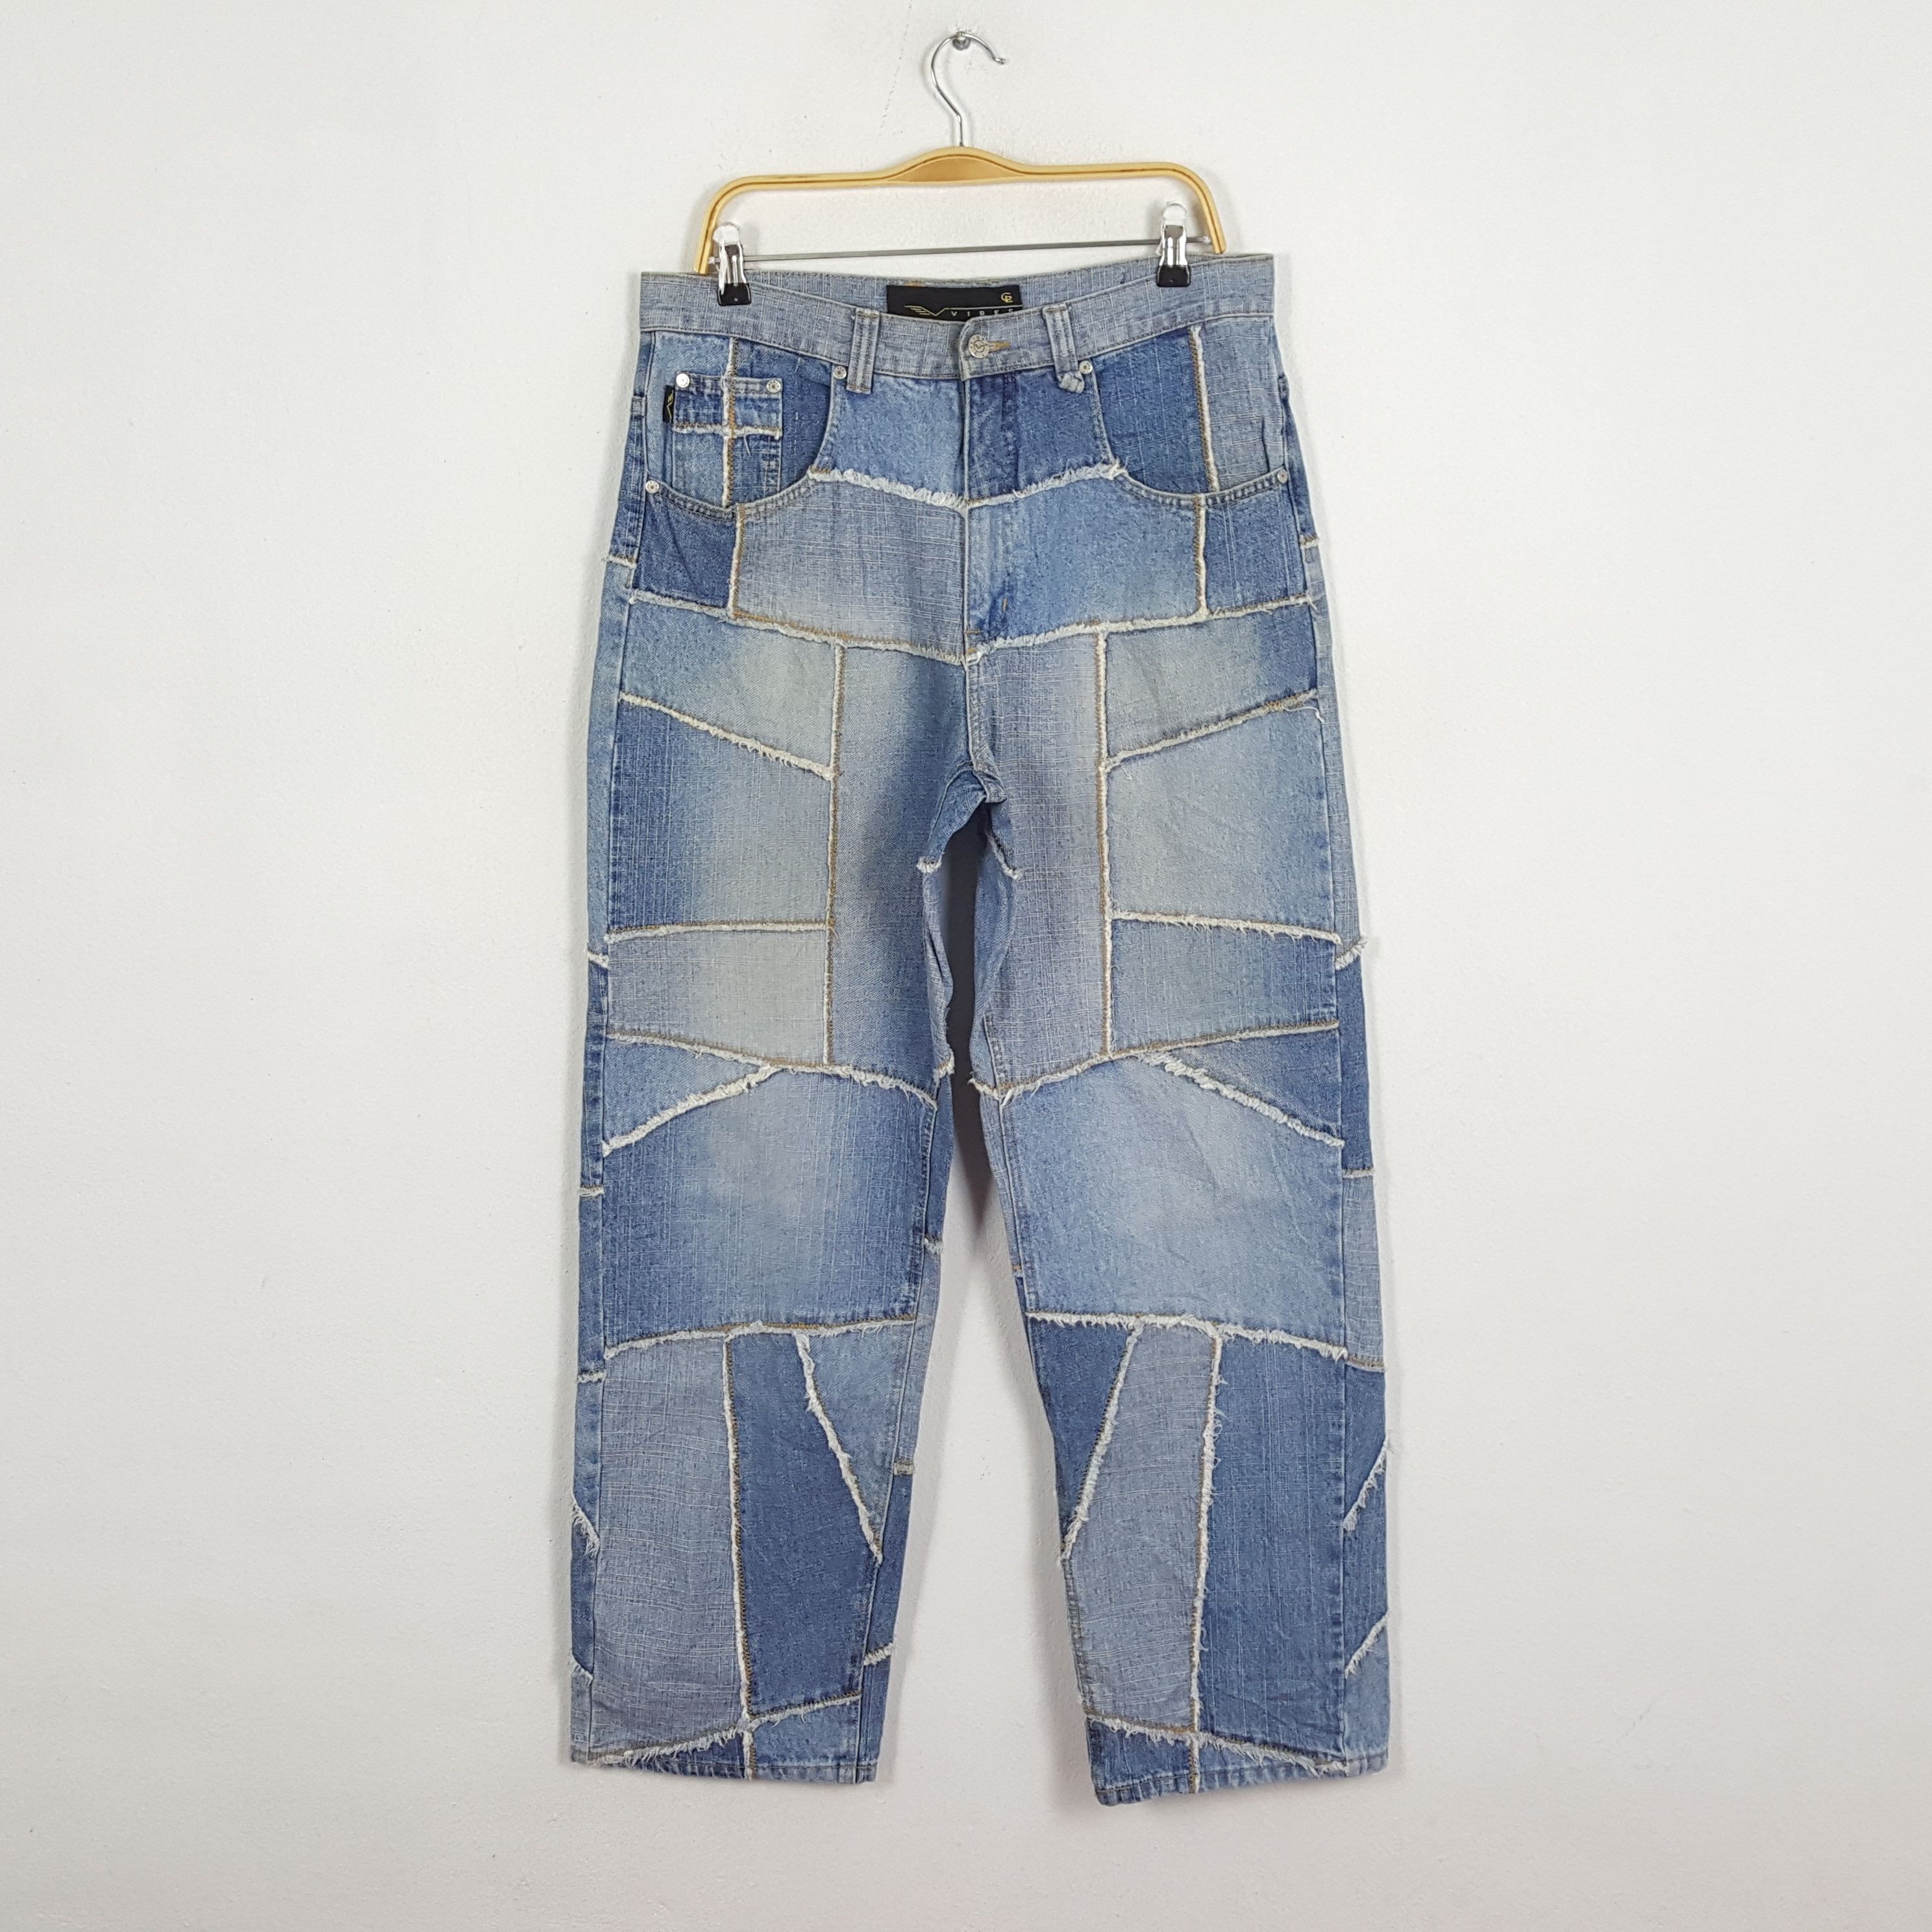 cheap deals on sale Vintage IBES GOLD LABEL Japanese Patchwork Style Jeans